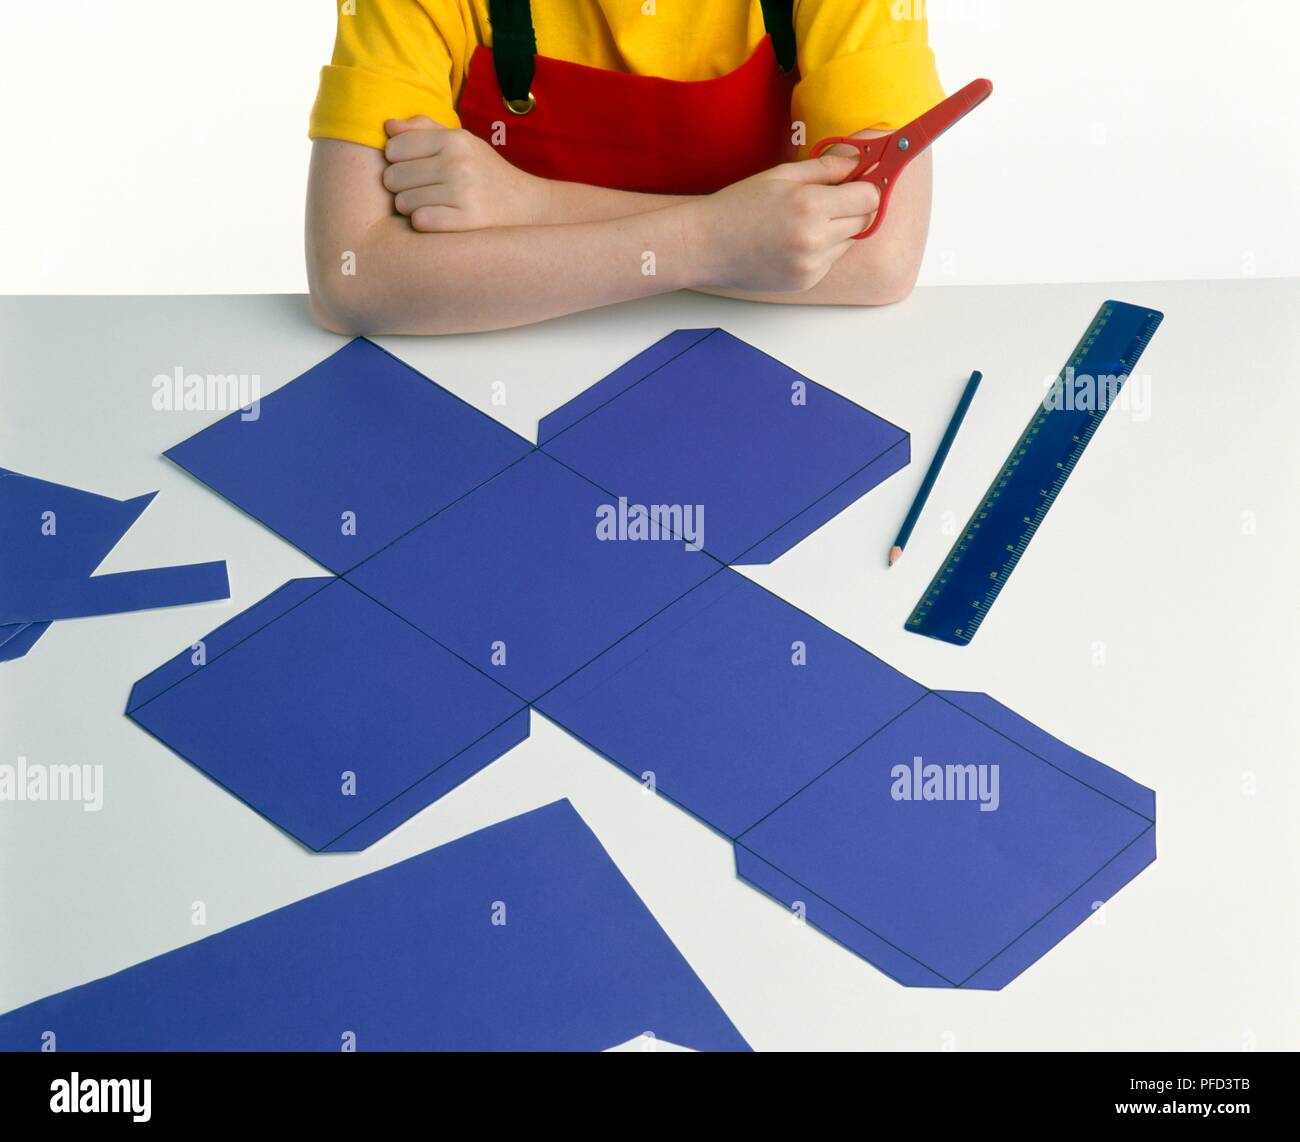 Making box out of card, joined squares of card with flaps on the side, ruler and pencil laid out on table, girl with her arms crossed holding pair of scissors, close-up Stock Photo